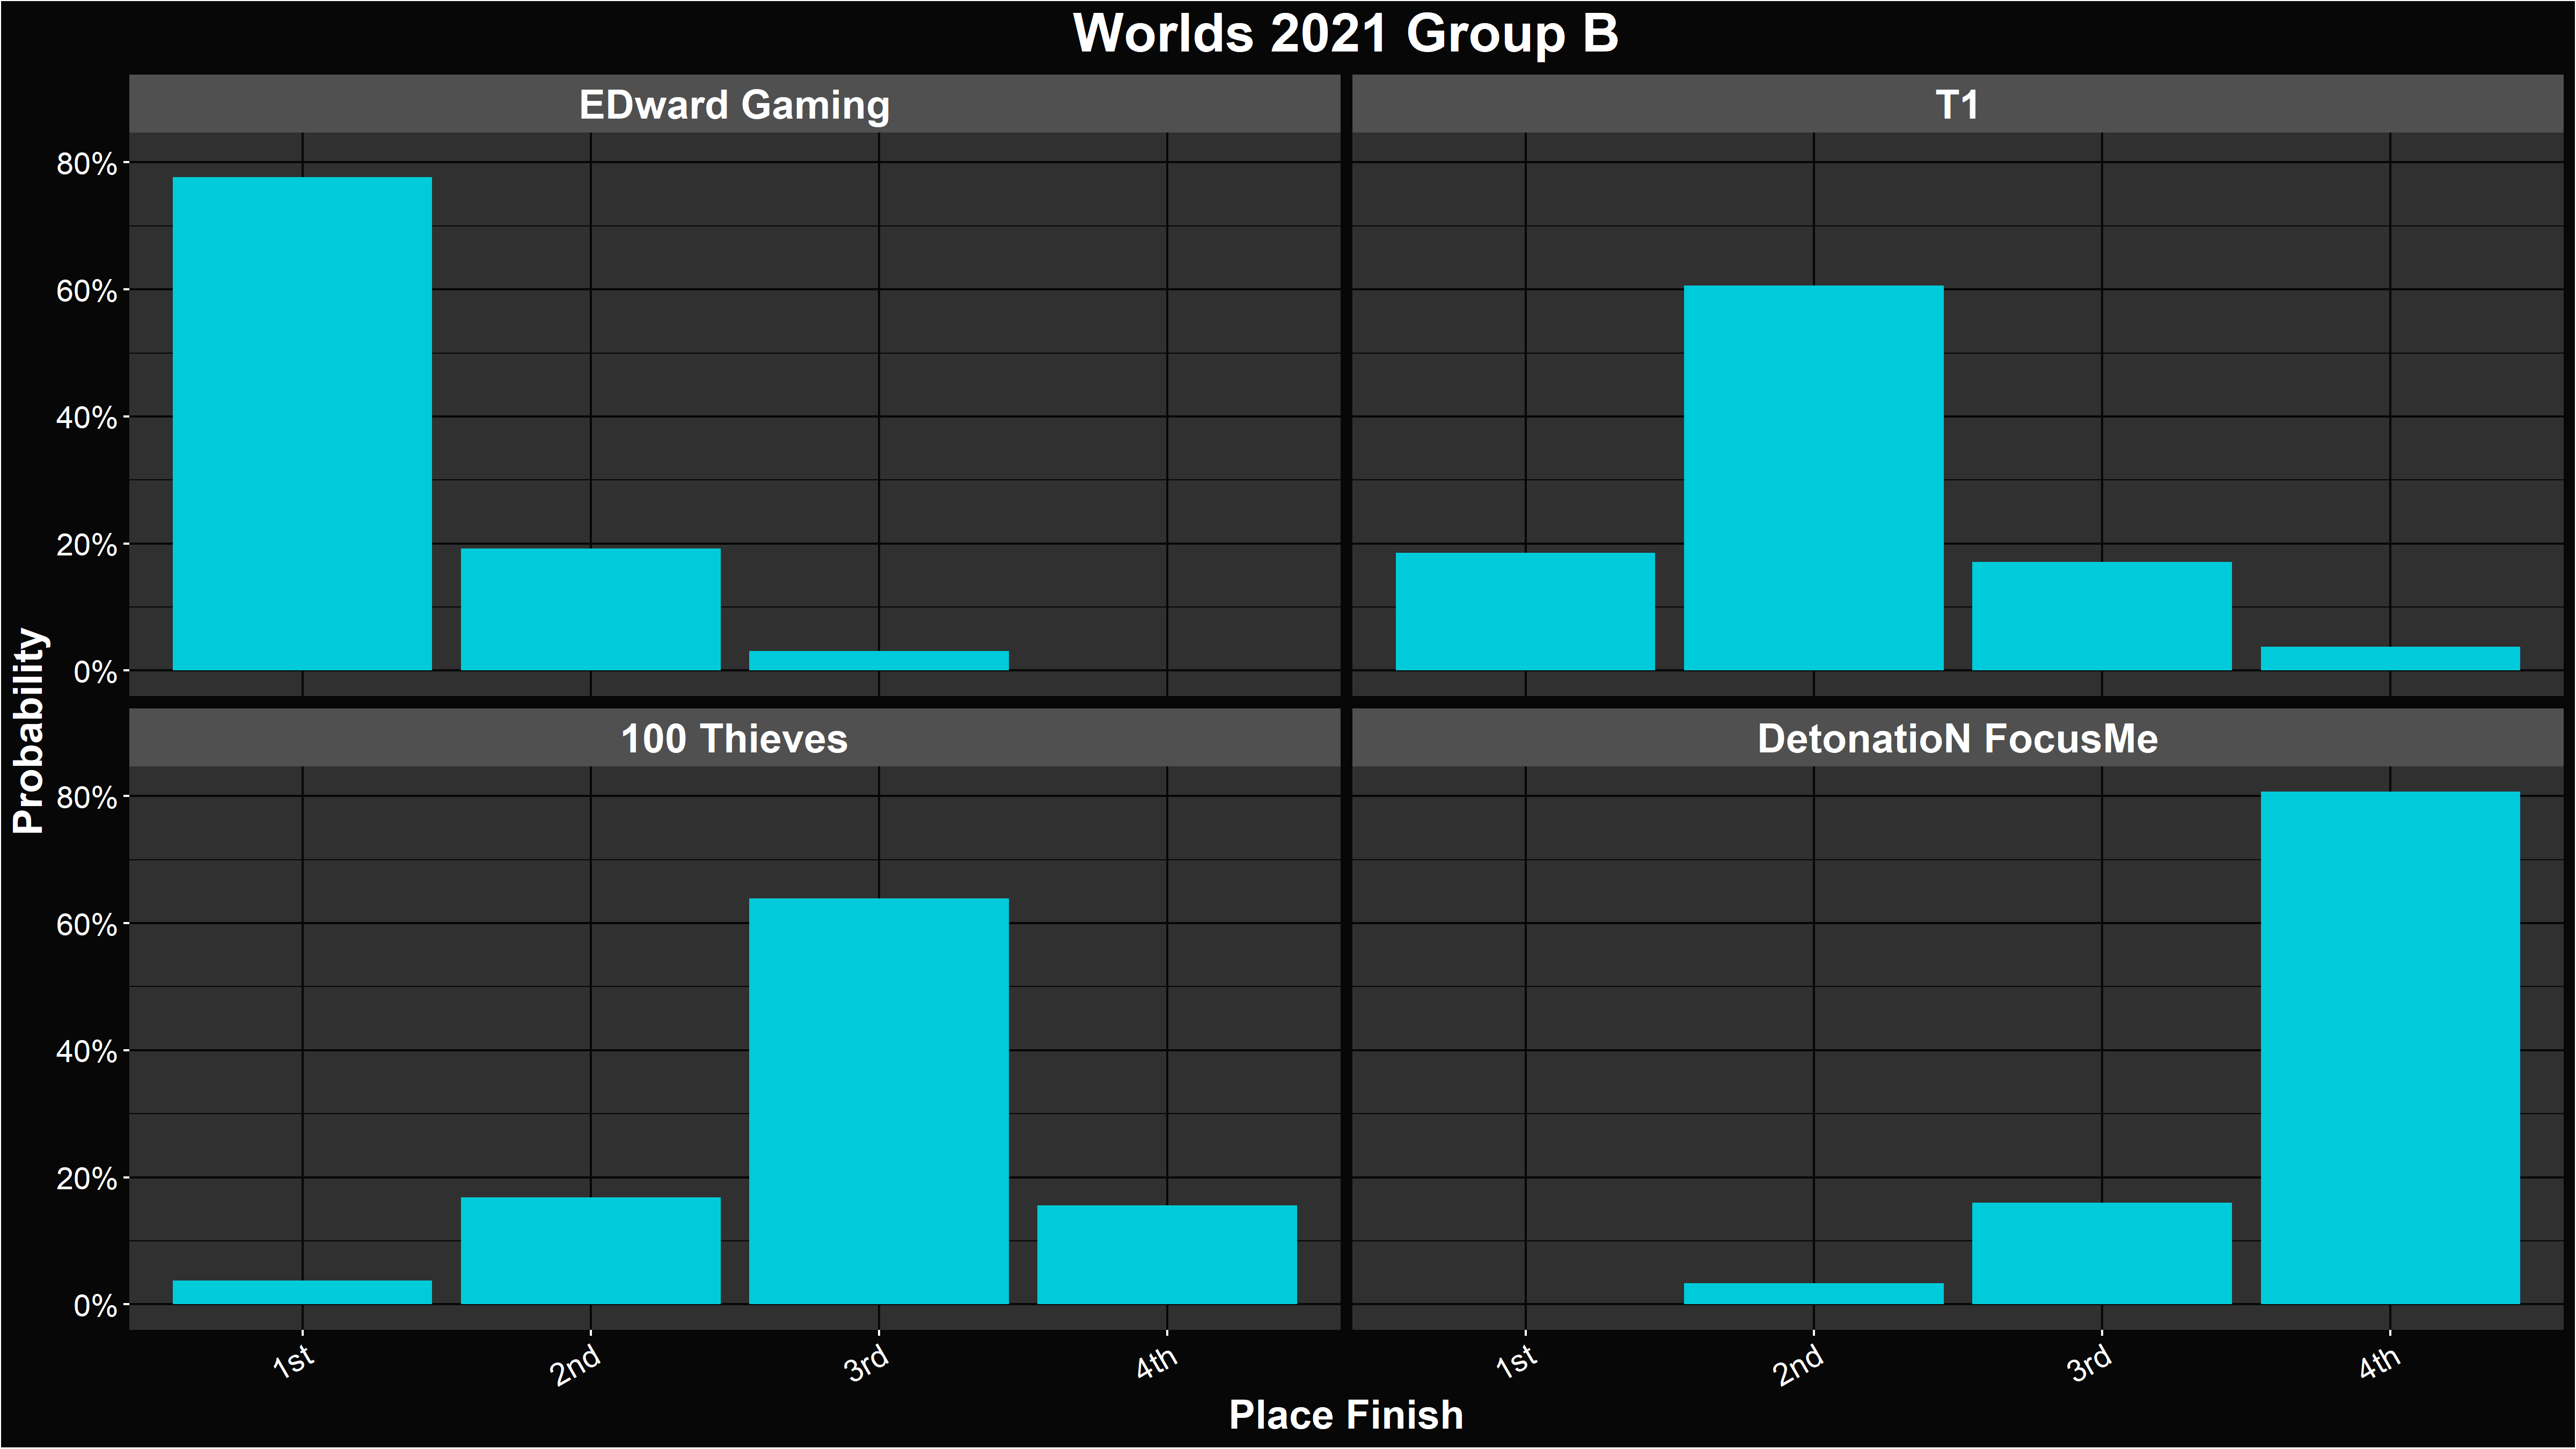 Alacrity's LoL Worlds 2021 Group B Placement Distributions